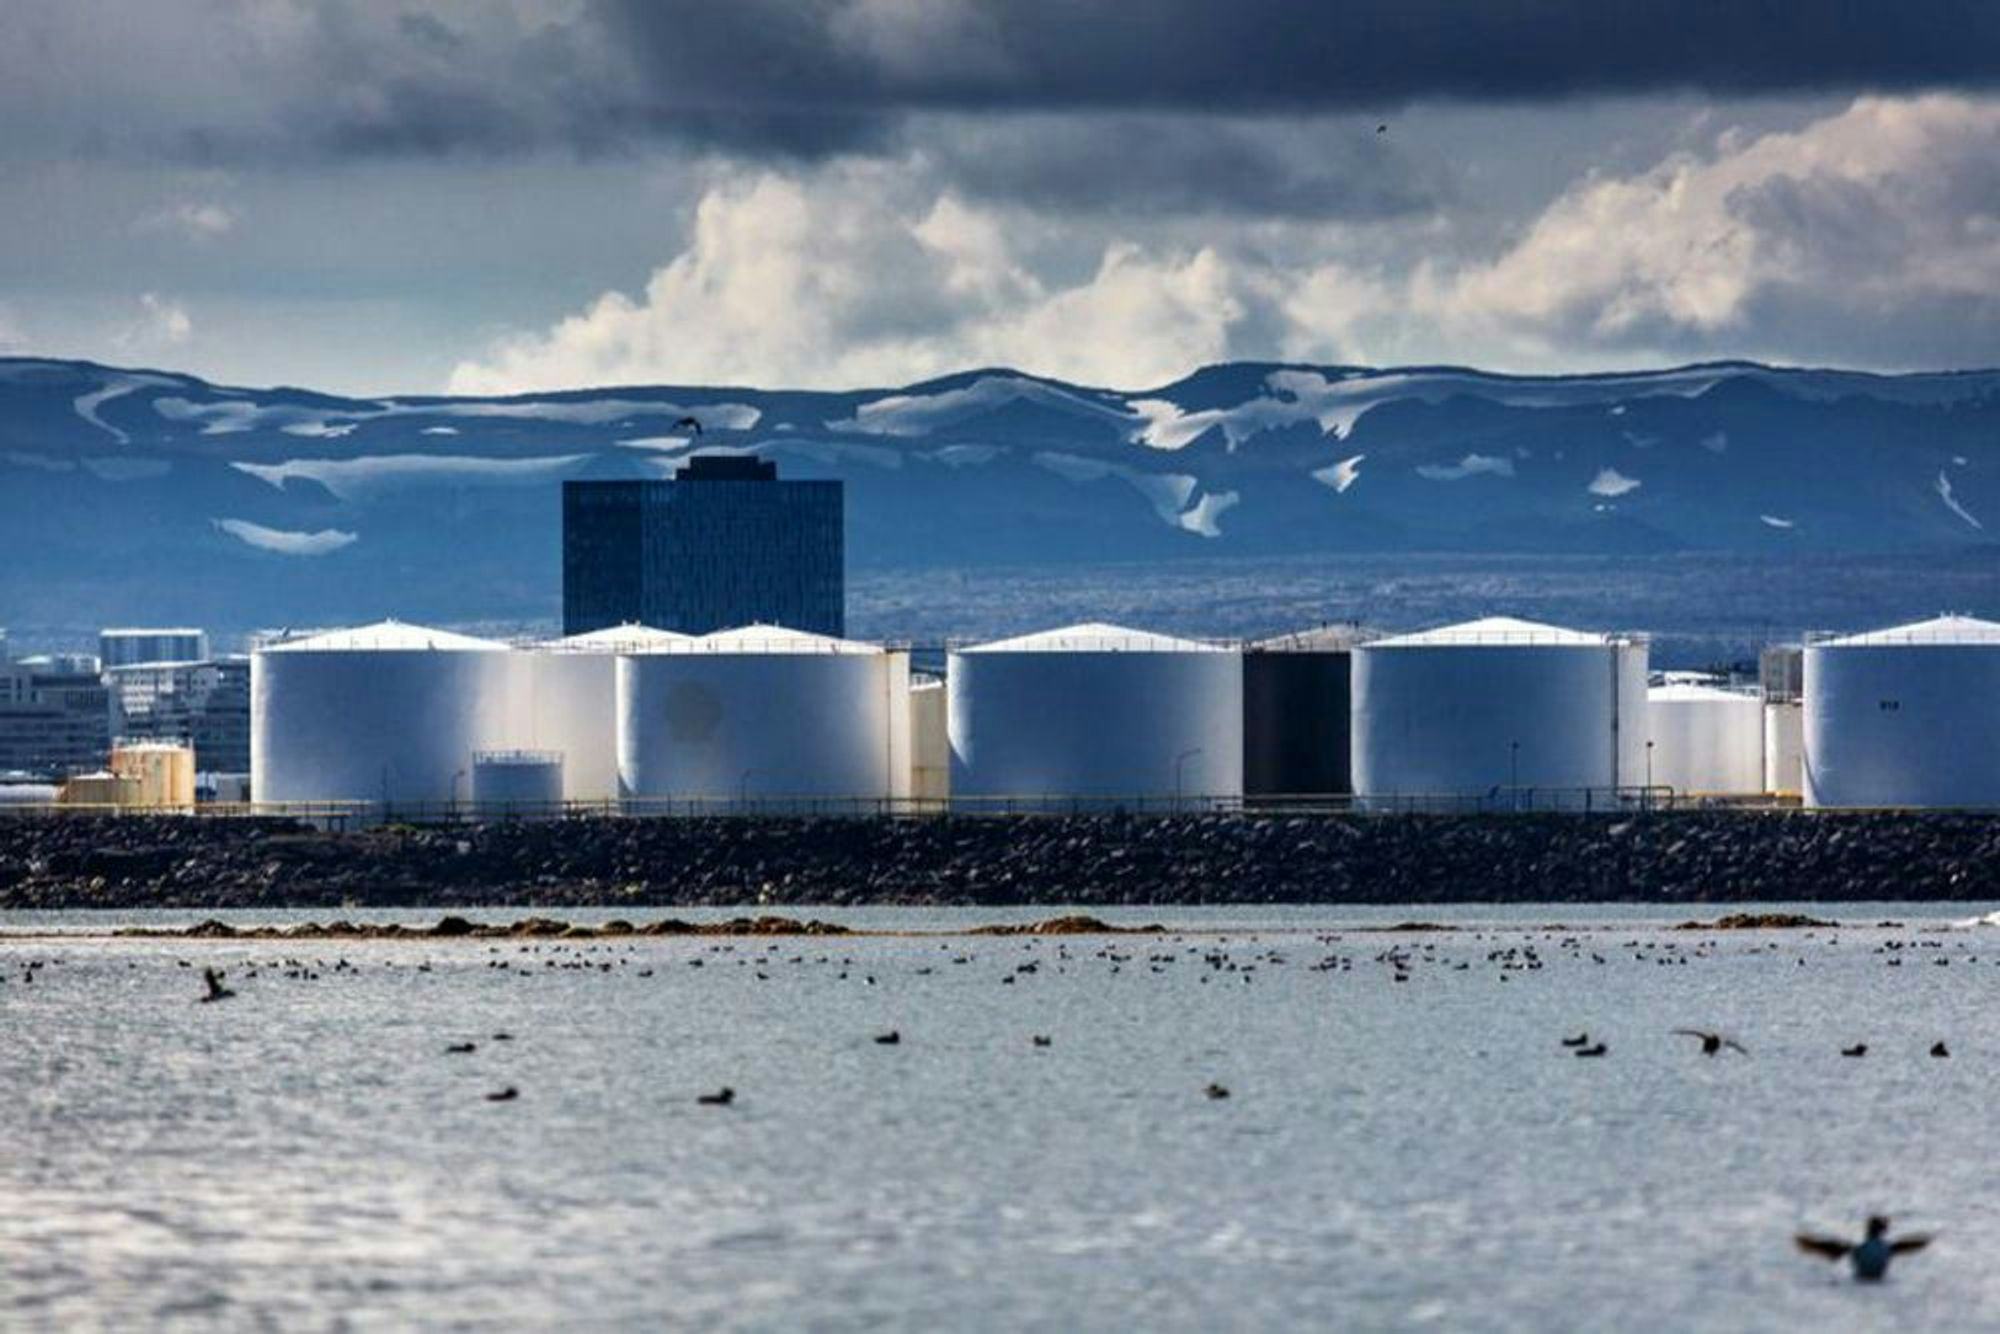 A row of white industrial storage tanks by the water